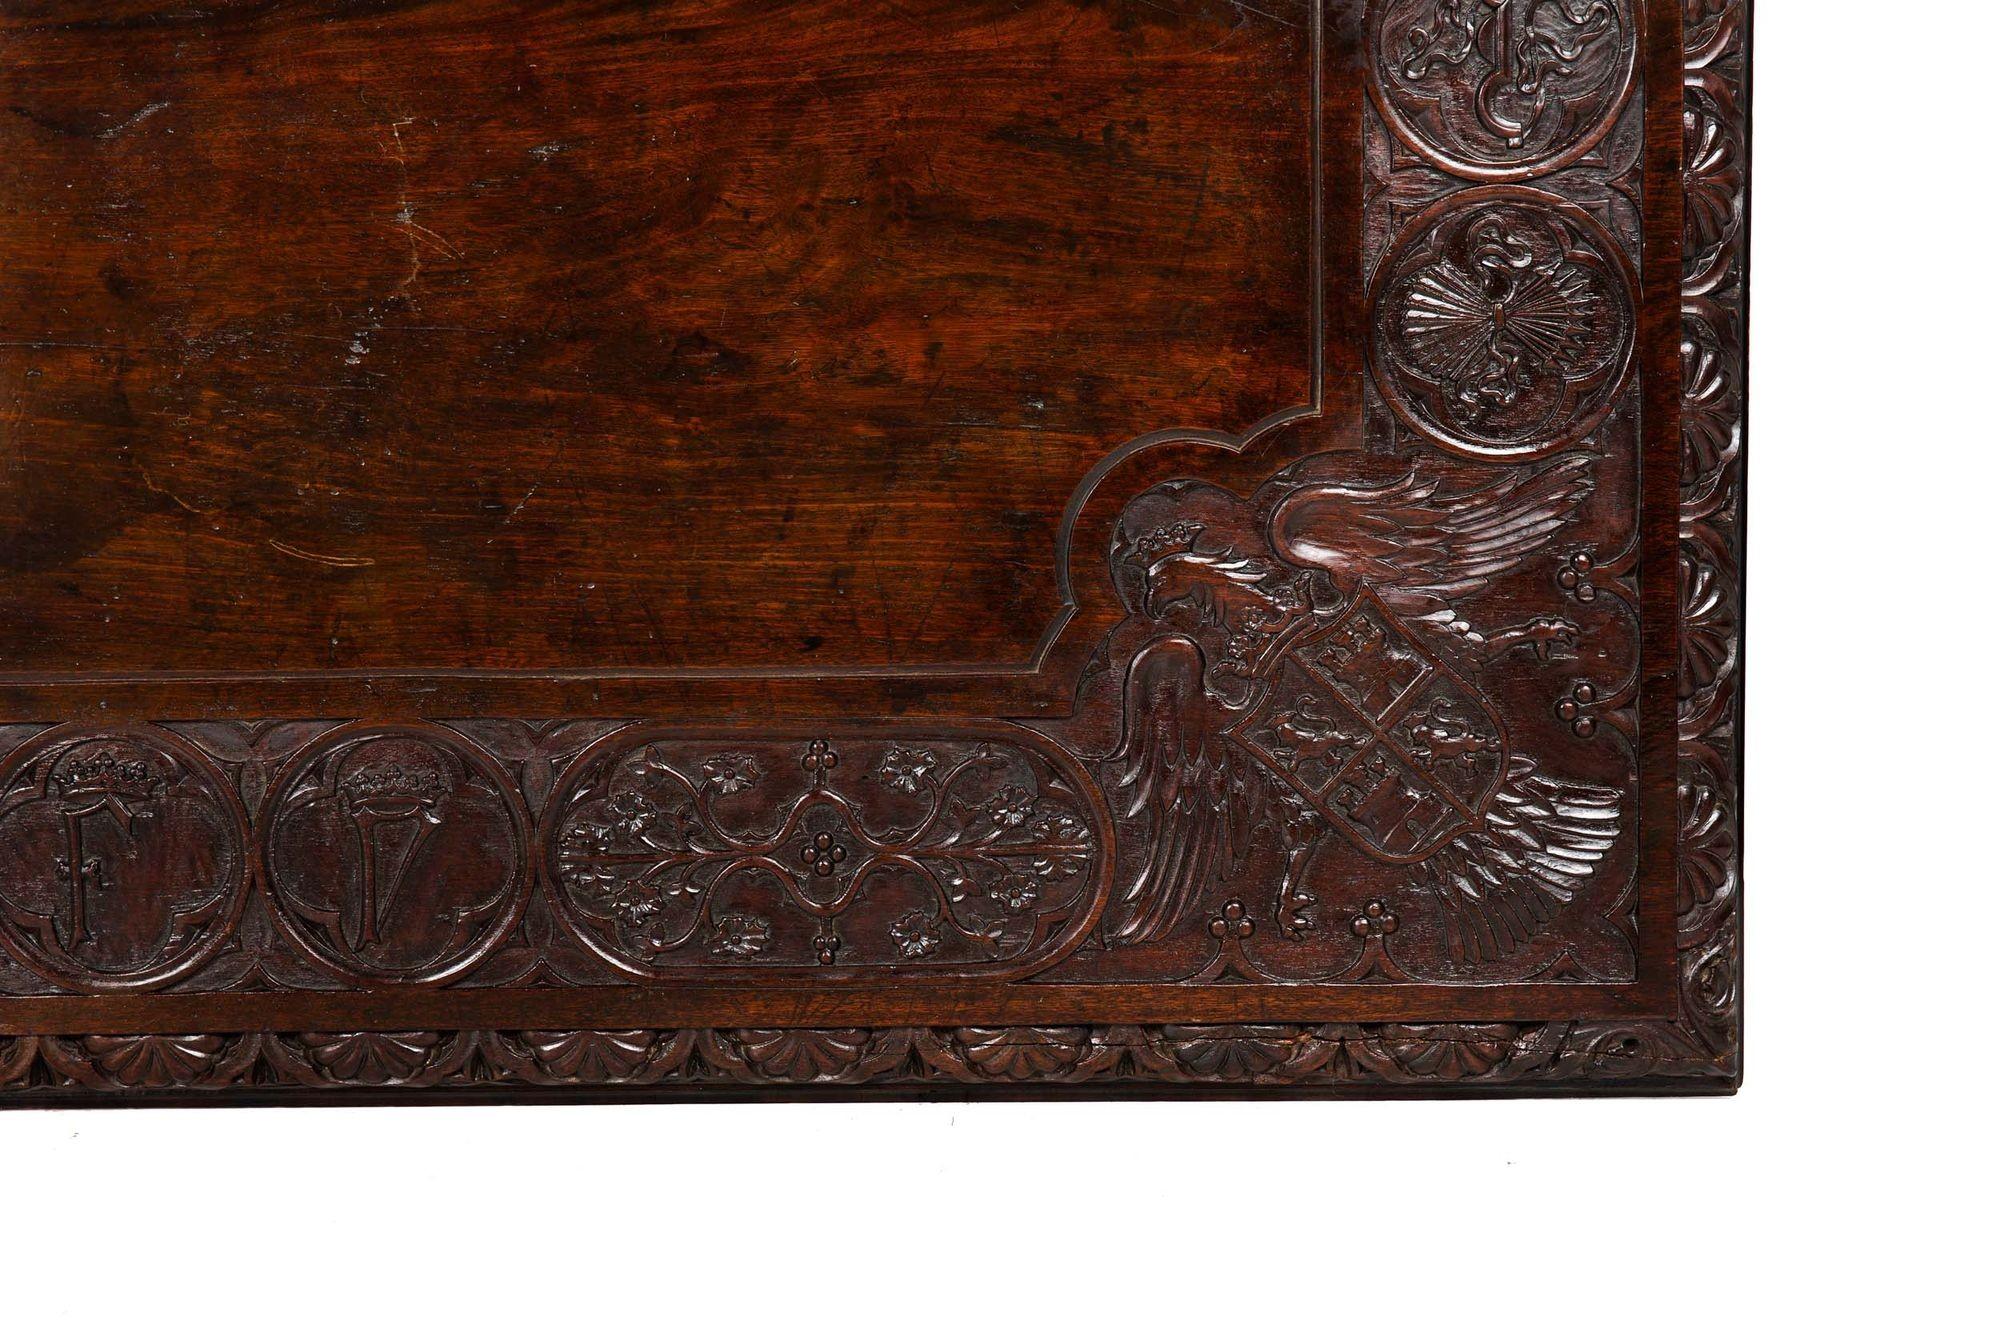 Circa 1900 Gothic Revival Antique Carved Walnut Library Table For Sale 7